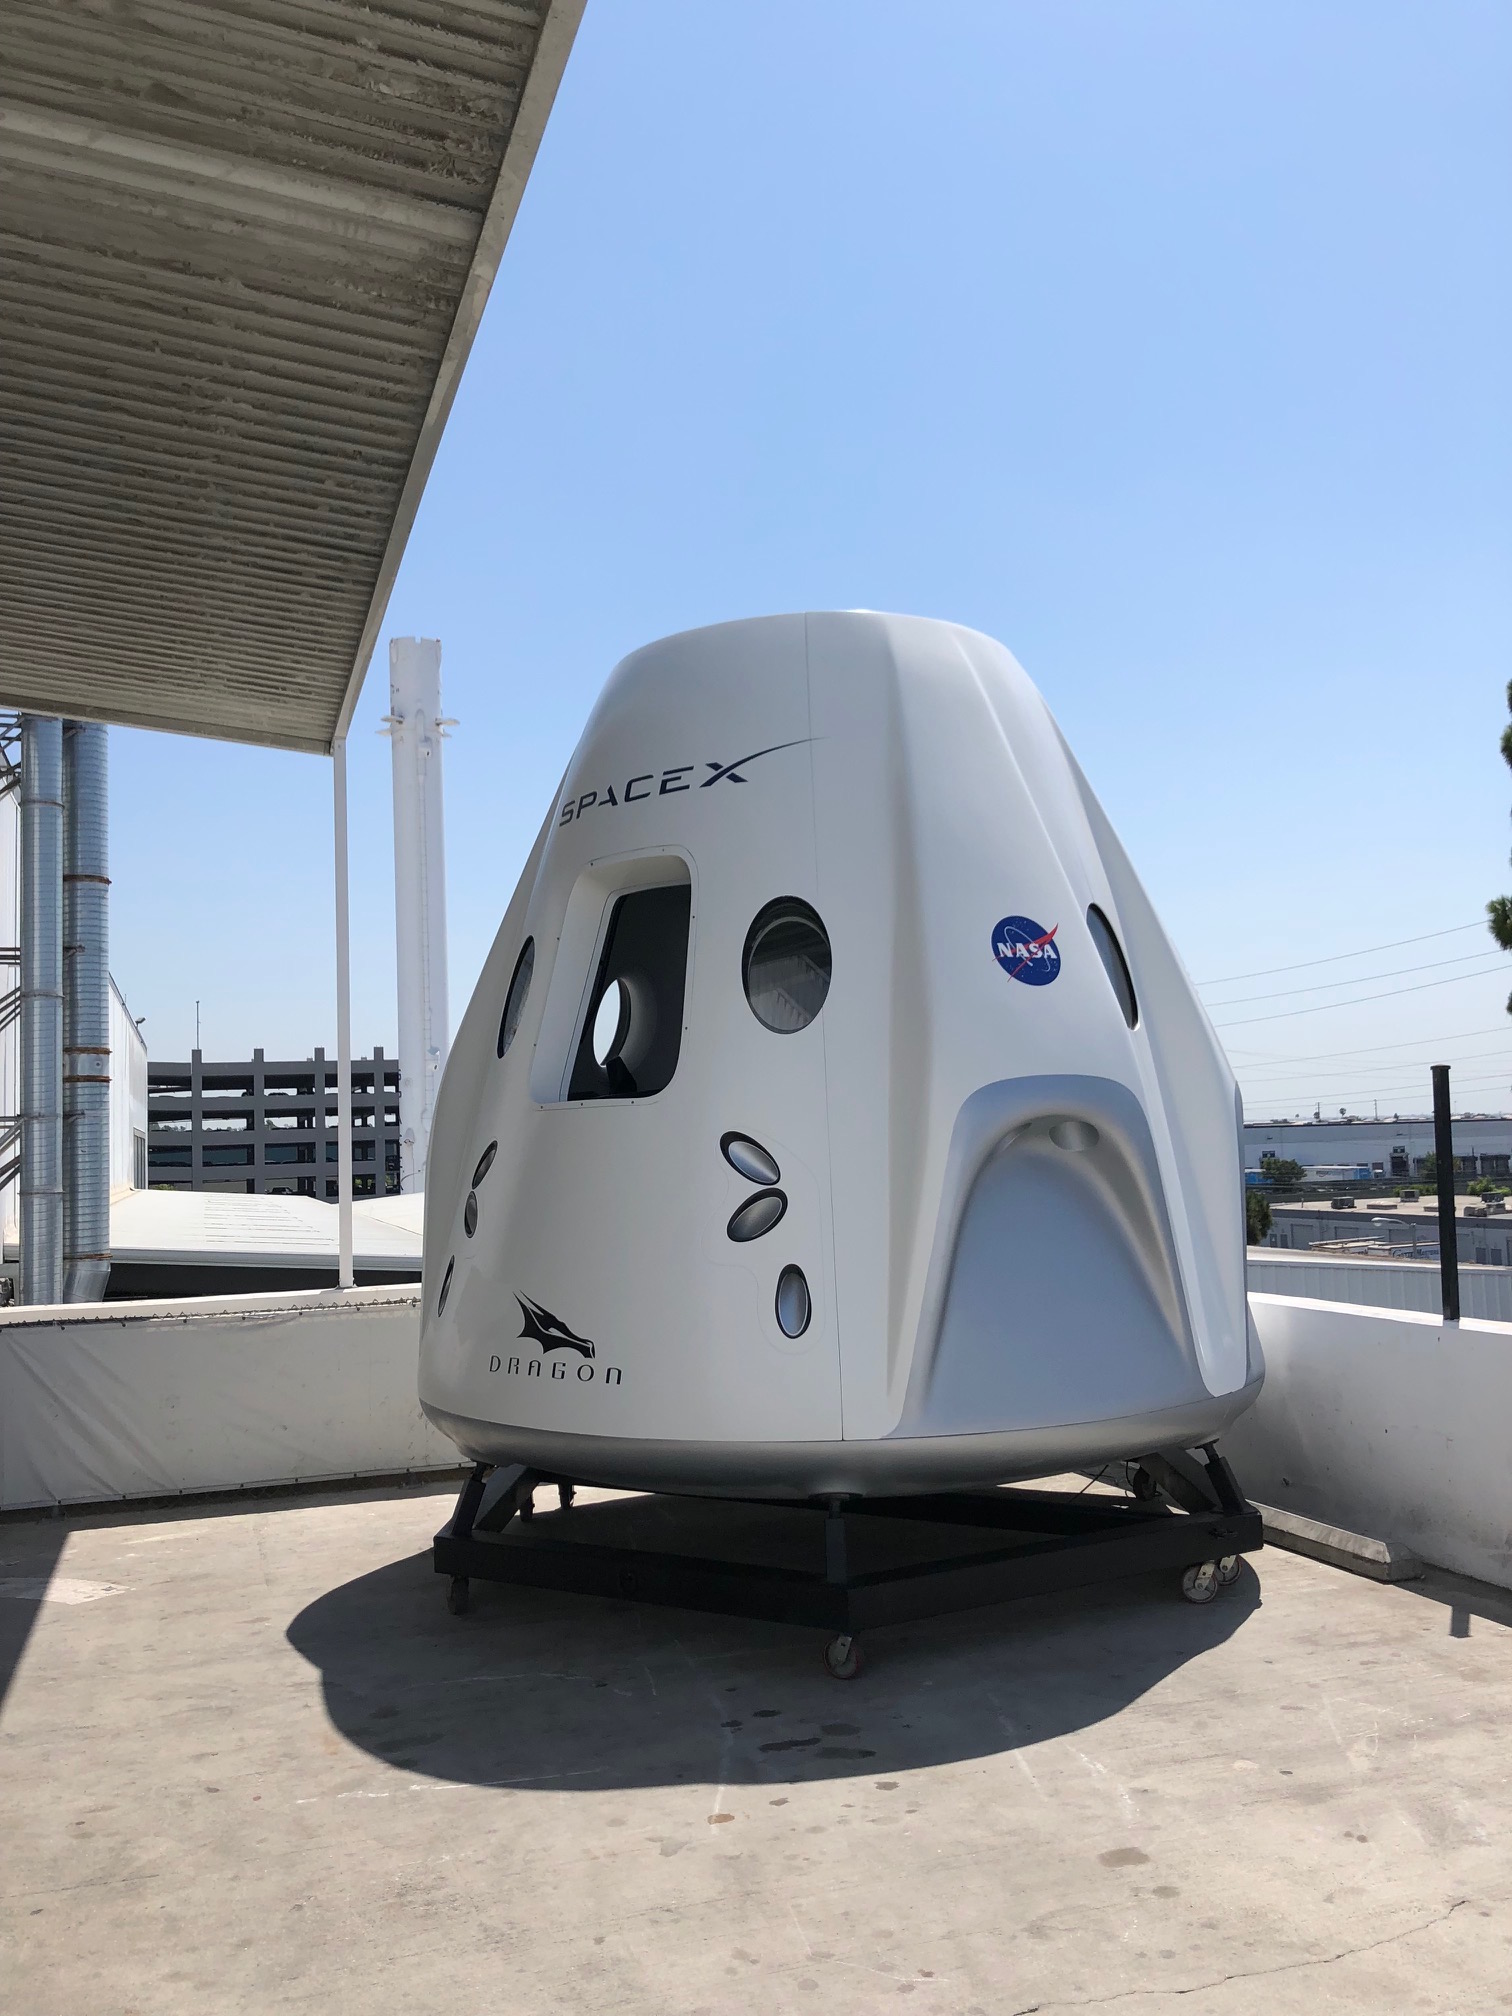 Step Inside Spacex S New Crew Dragon Spaceship Photos Space